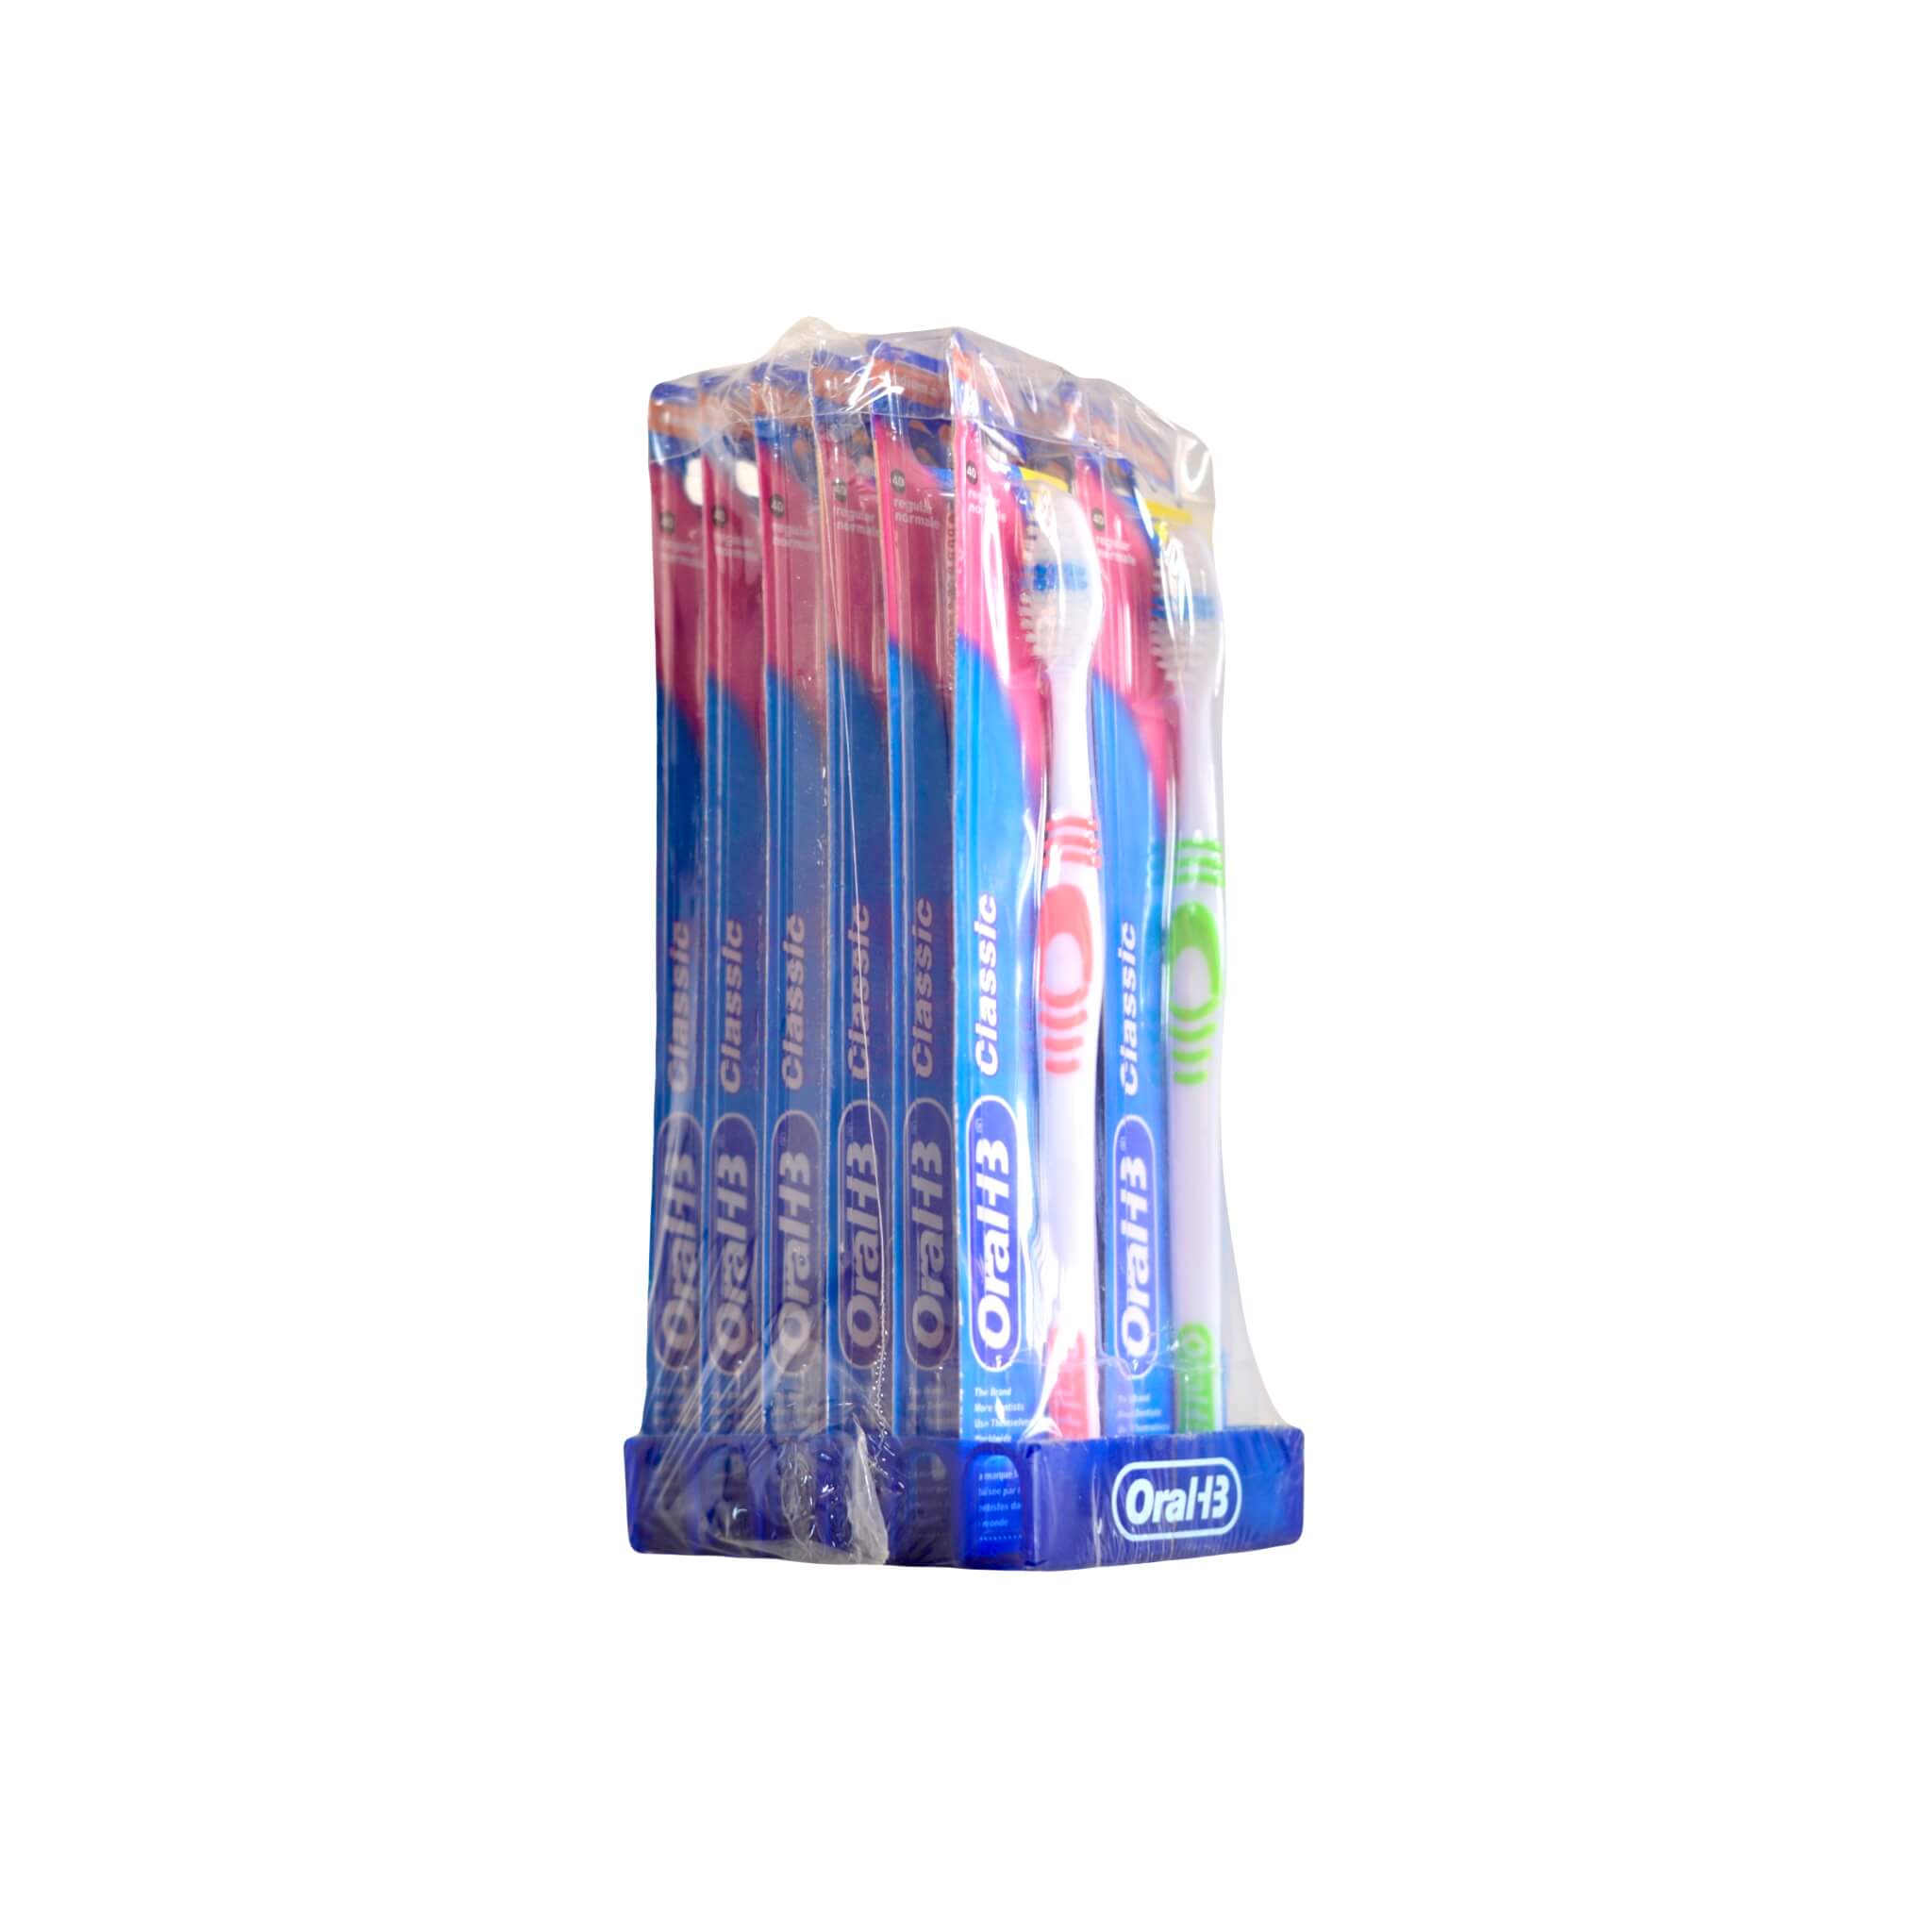 a pack of oral b tooth brush